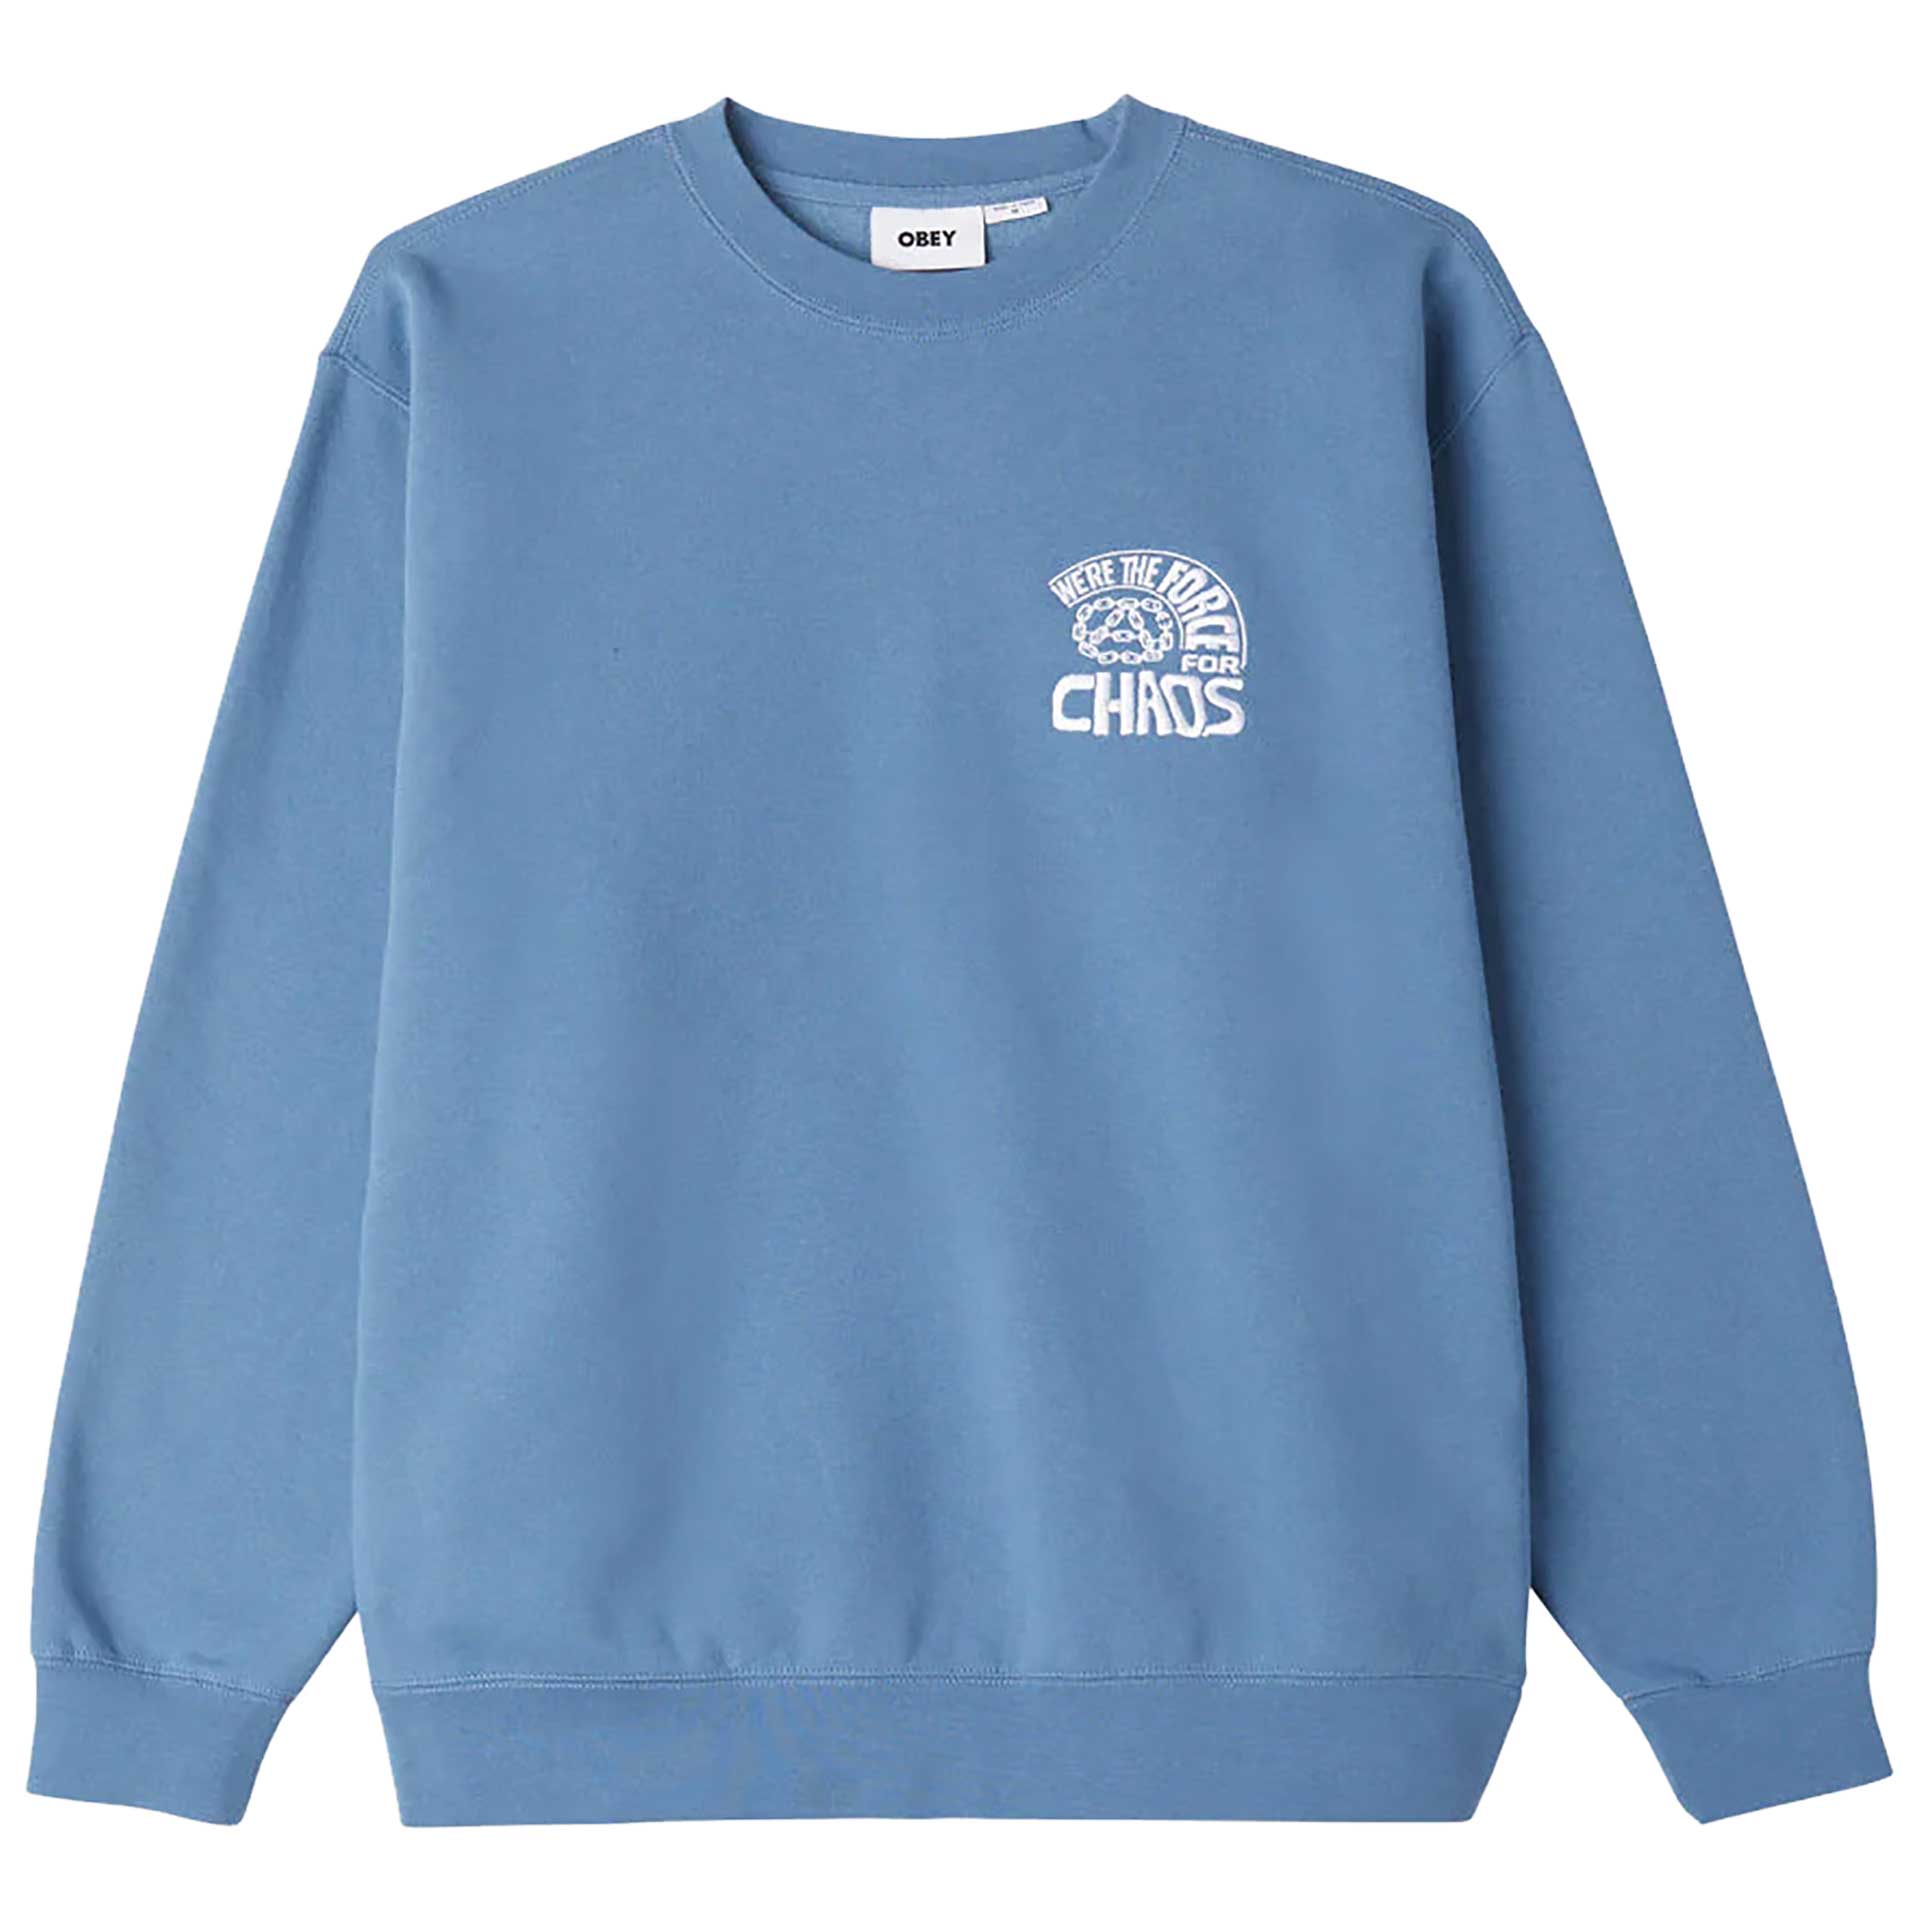 Obey Clothing Sweater peace program 2